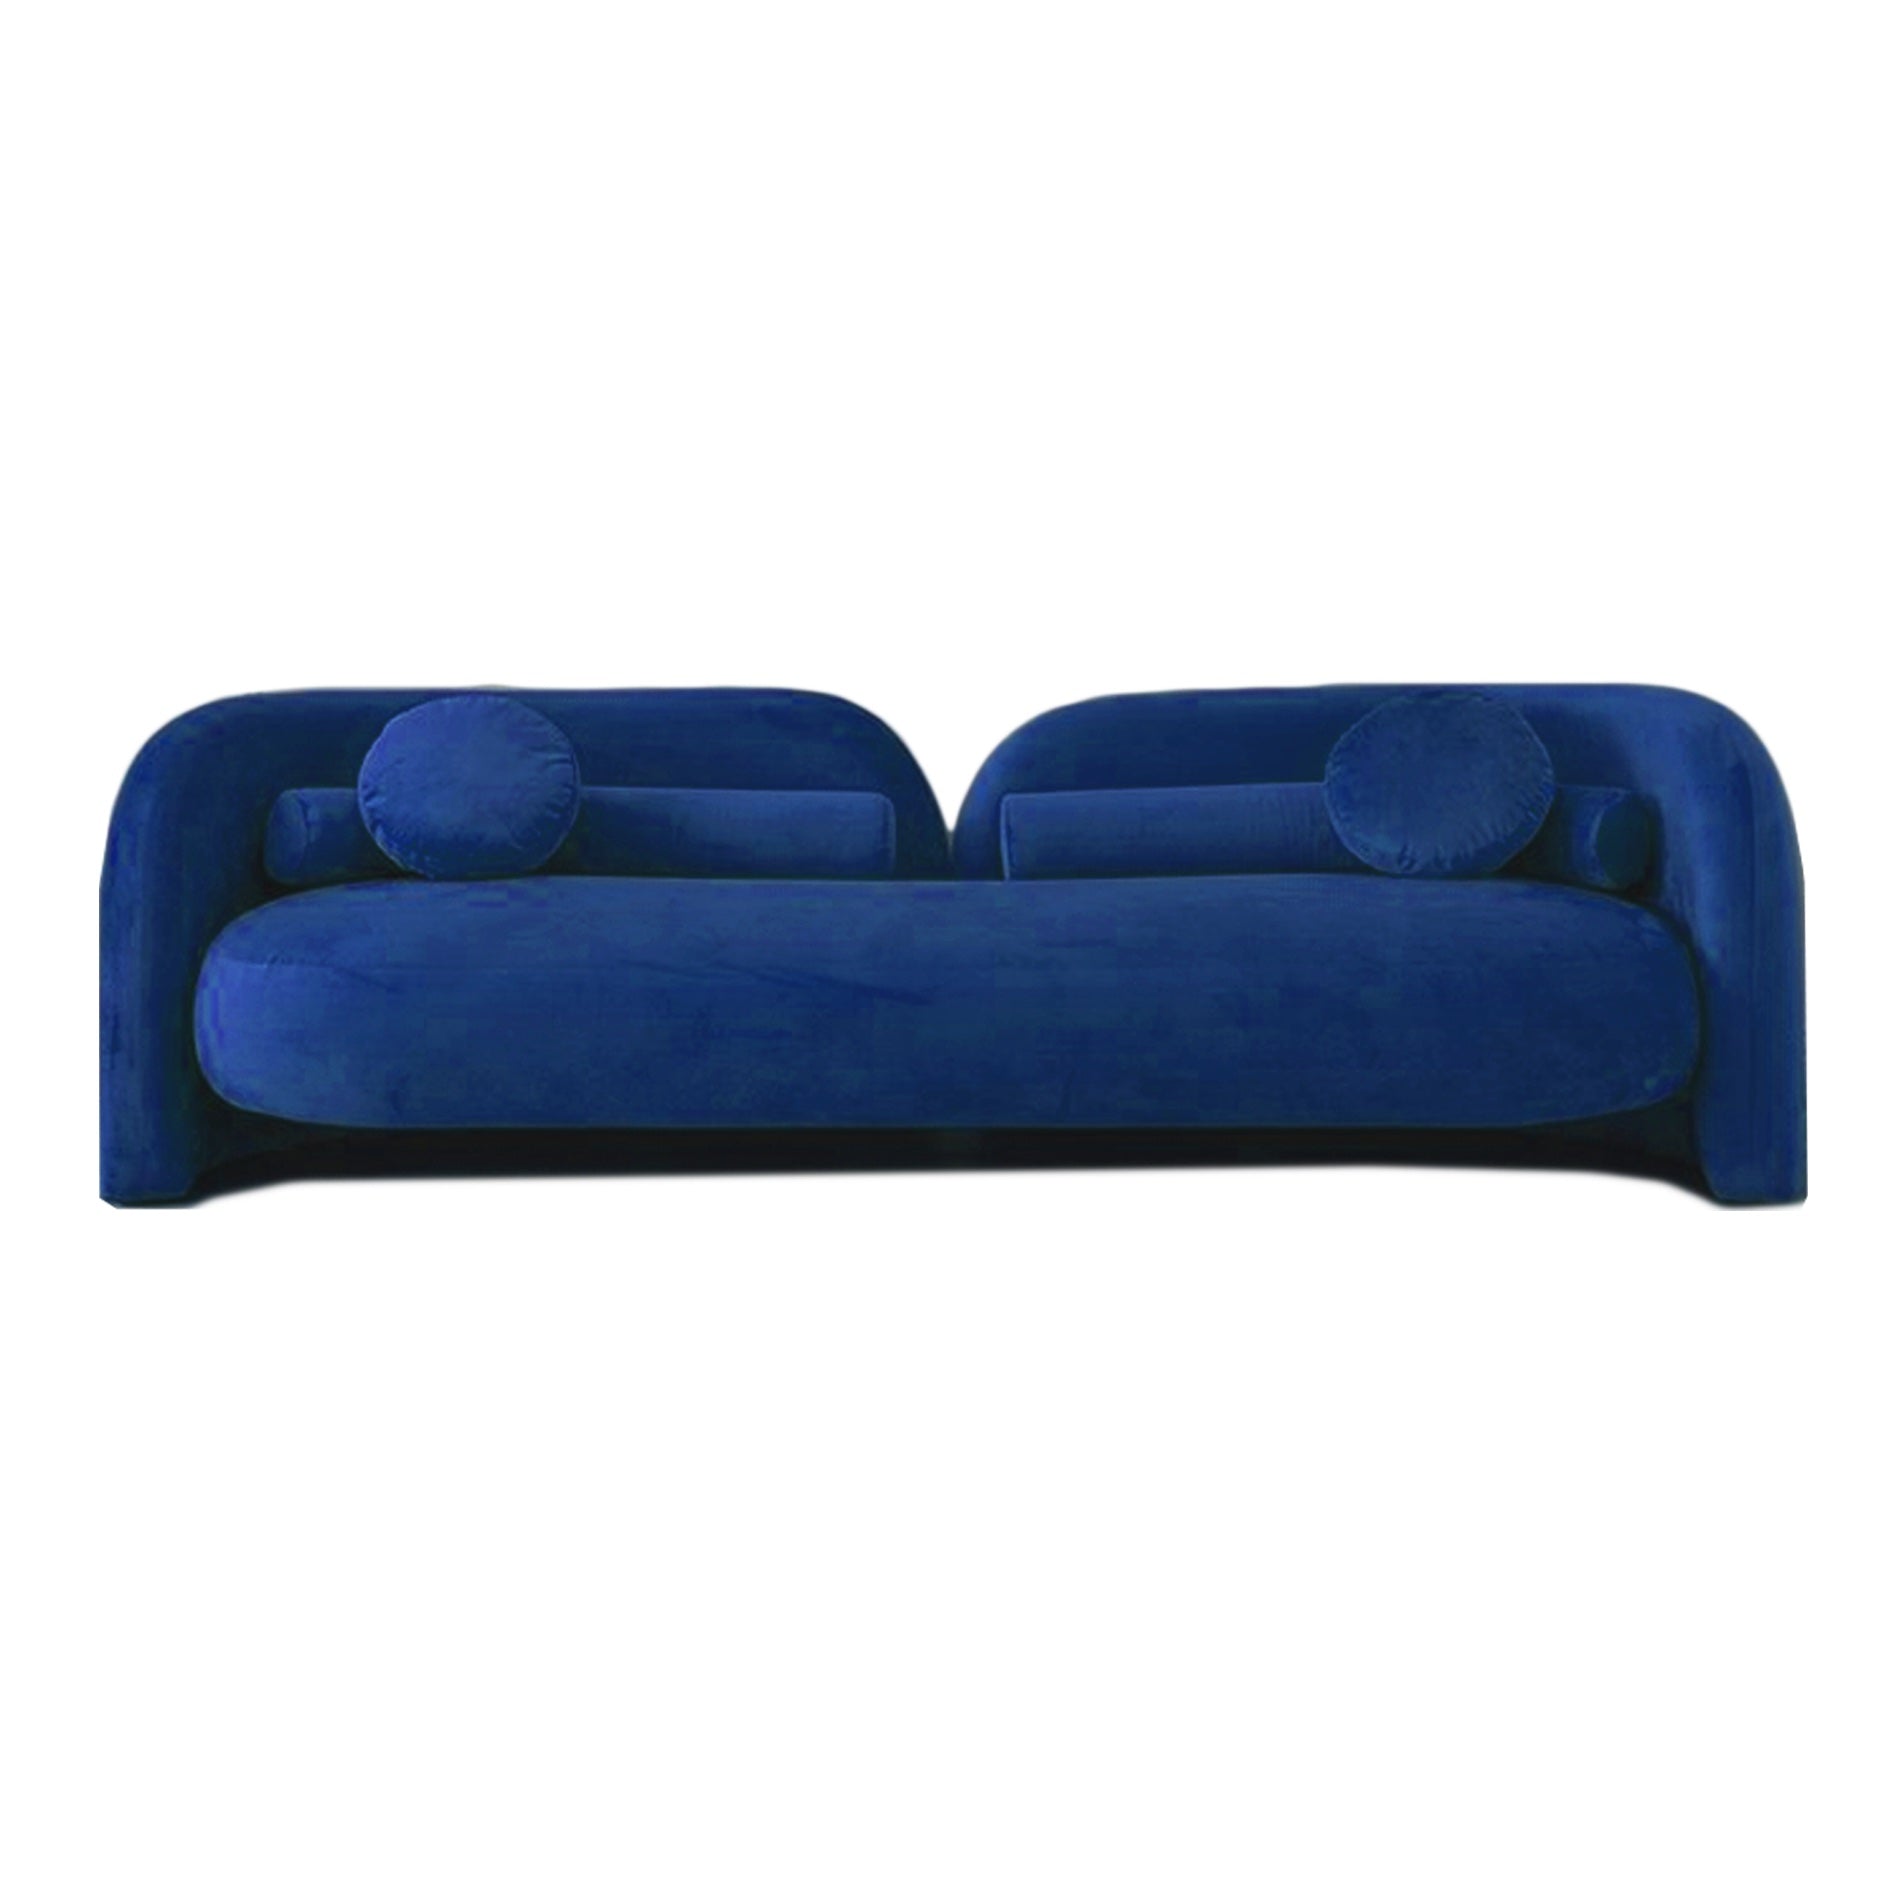 contemporary velvet upholstery sofa in navy blue, featuring deep cushioning and elegant tufted backrest, perfect for luxurious event seating